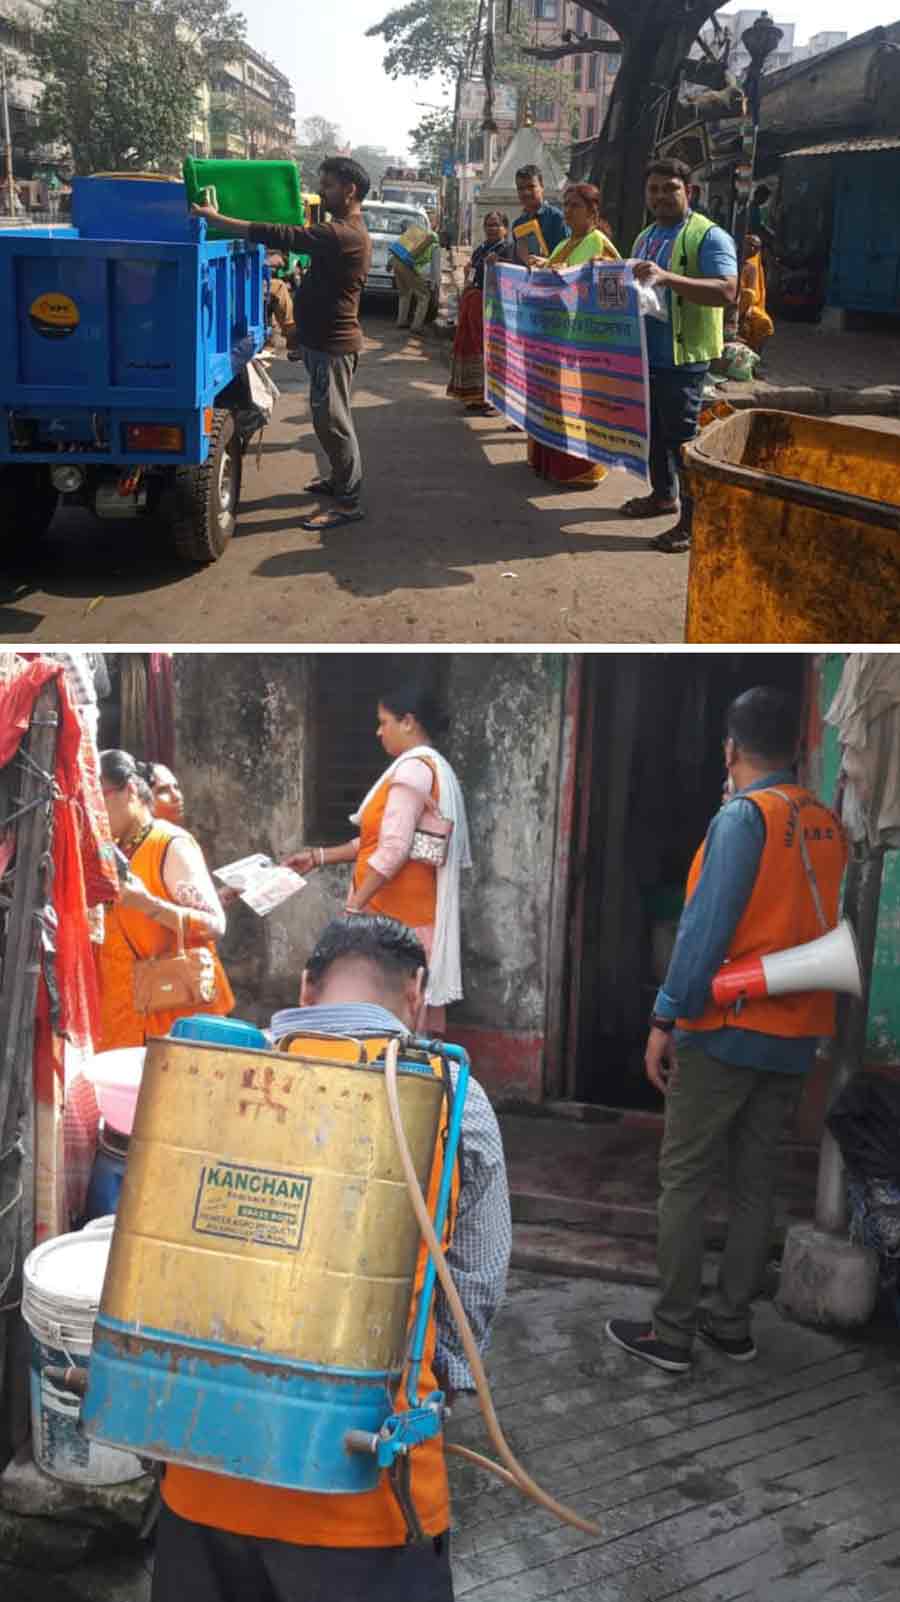 Following its cleanliness campaign across the city, Kolkata Municipal Corporation (KMC) workers sprinkled disinfectants and removed garbage on Friday